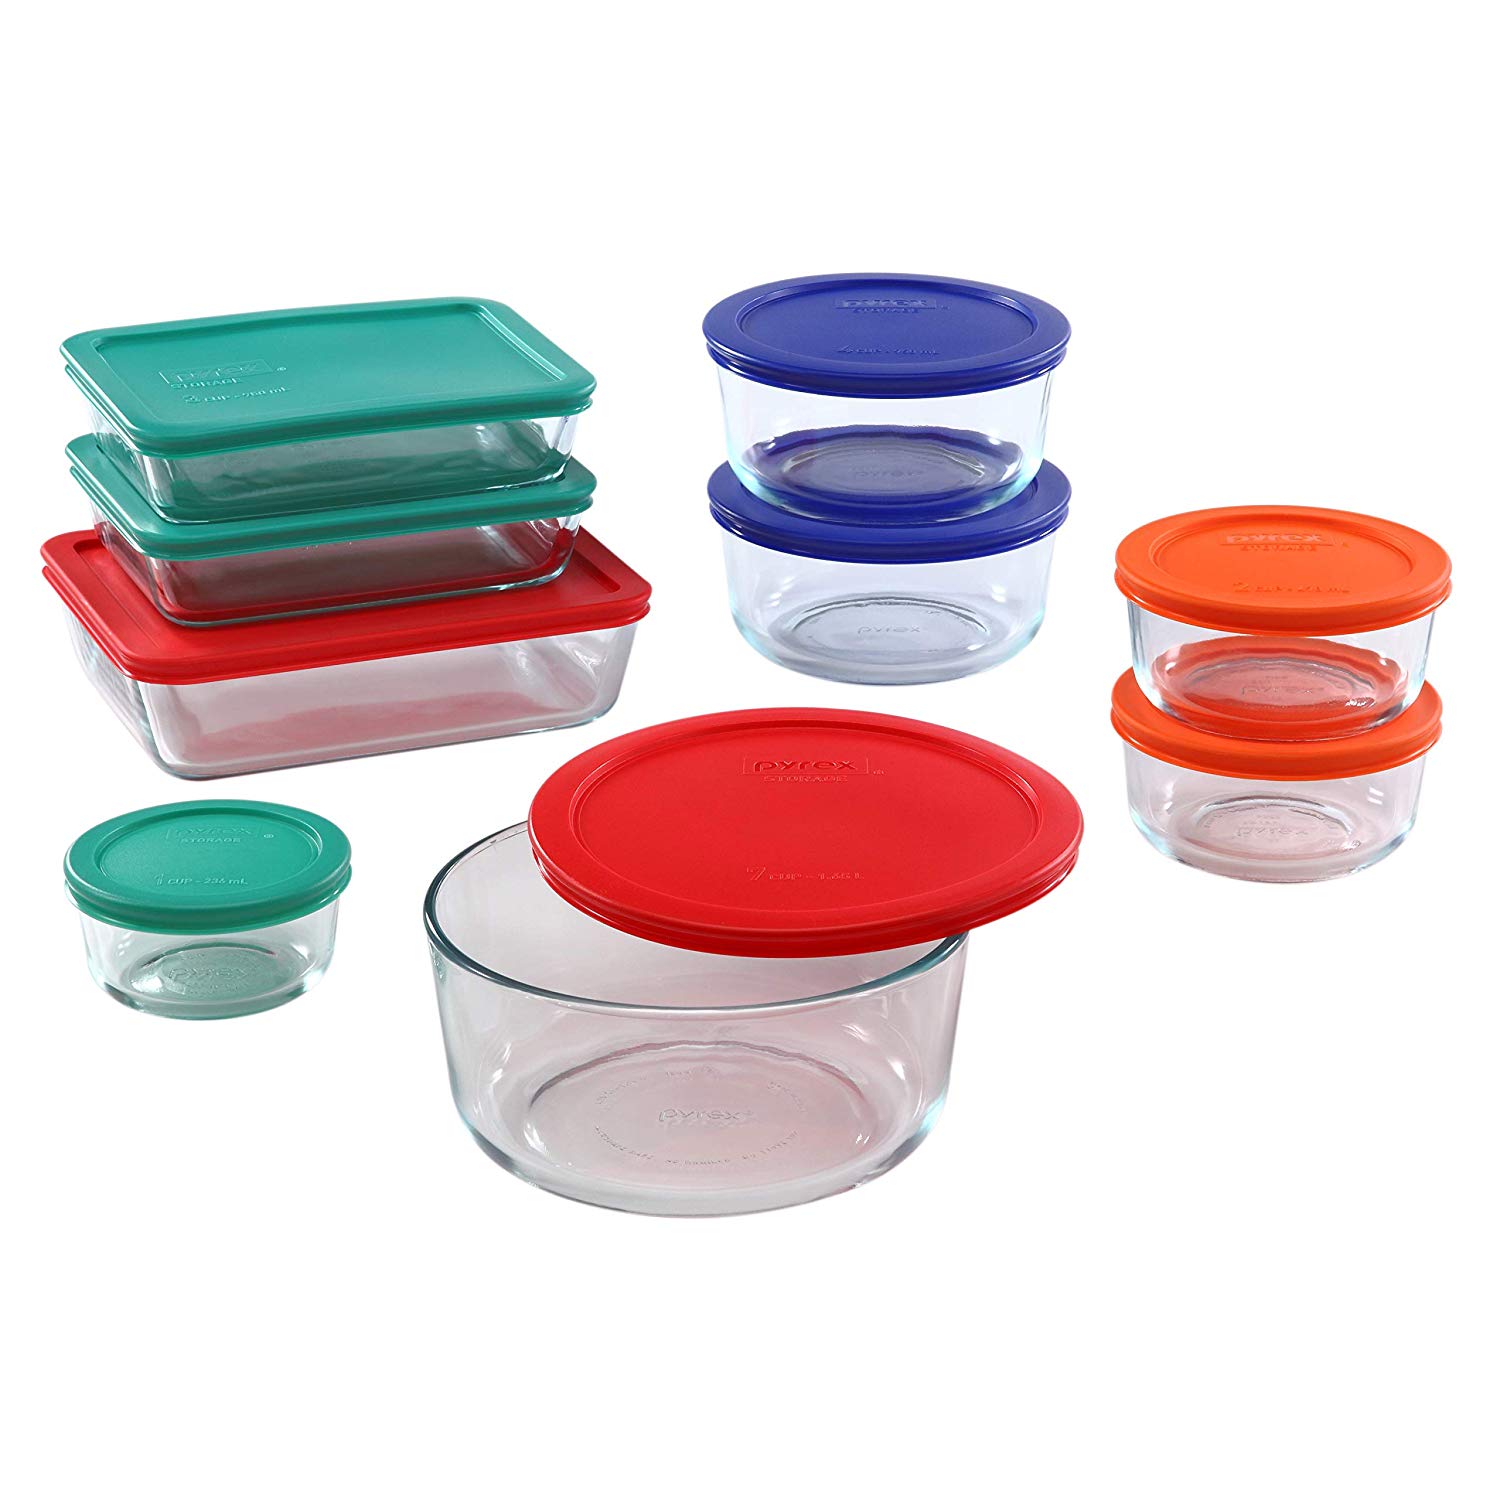 https://www.dontwasteyourmoney.com/wp-content/uploads/2019/10/pyrex-glass-food-container-set-storage-for-leftovers.jpg